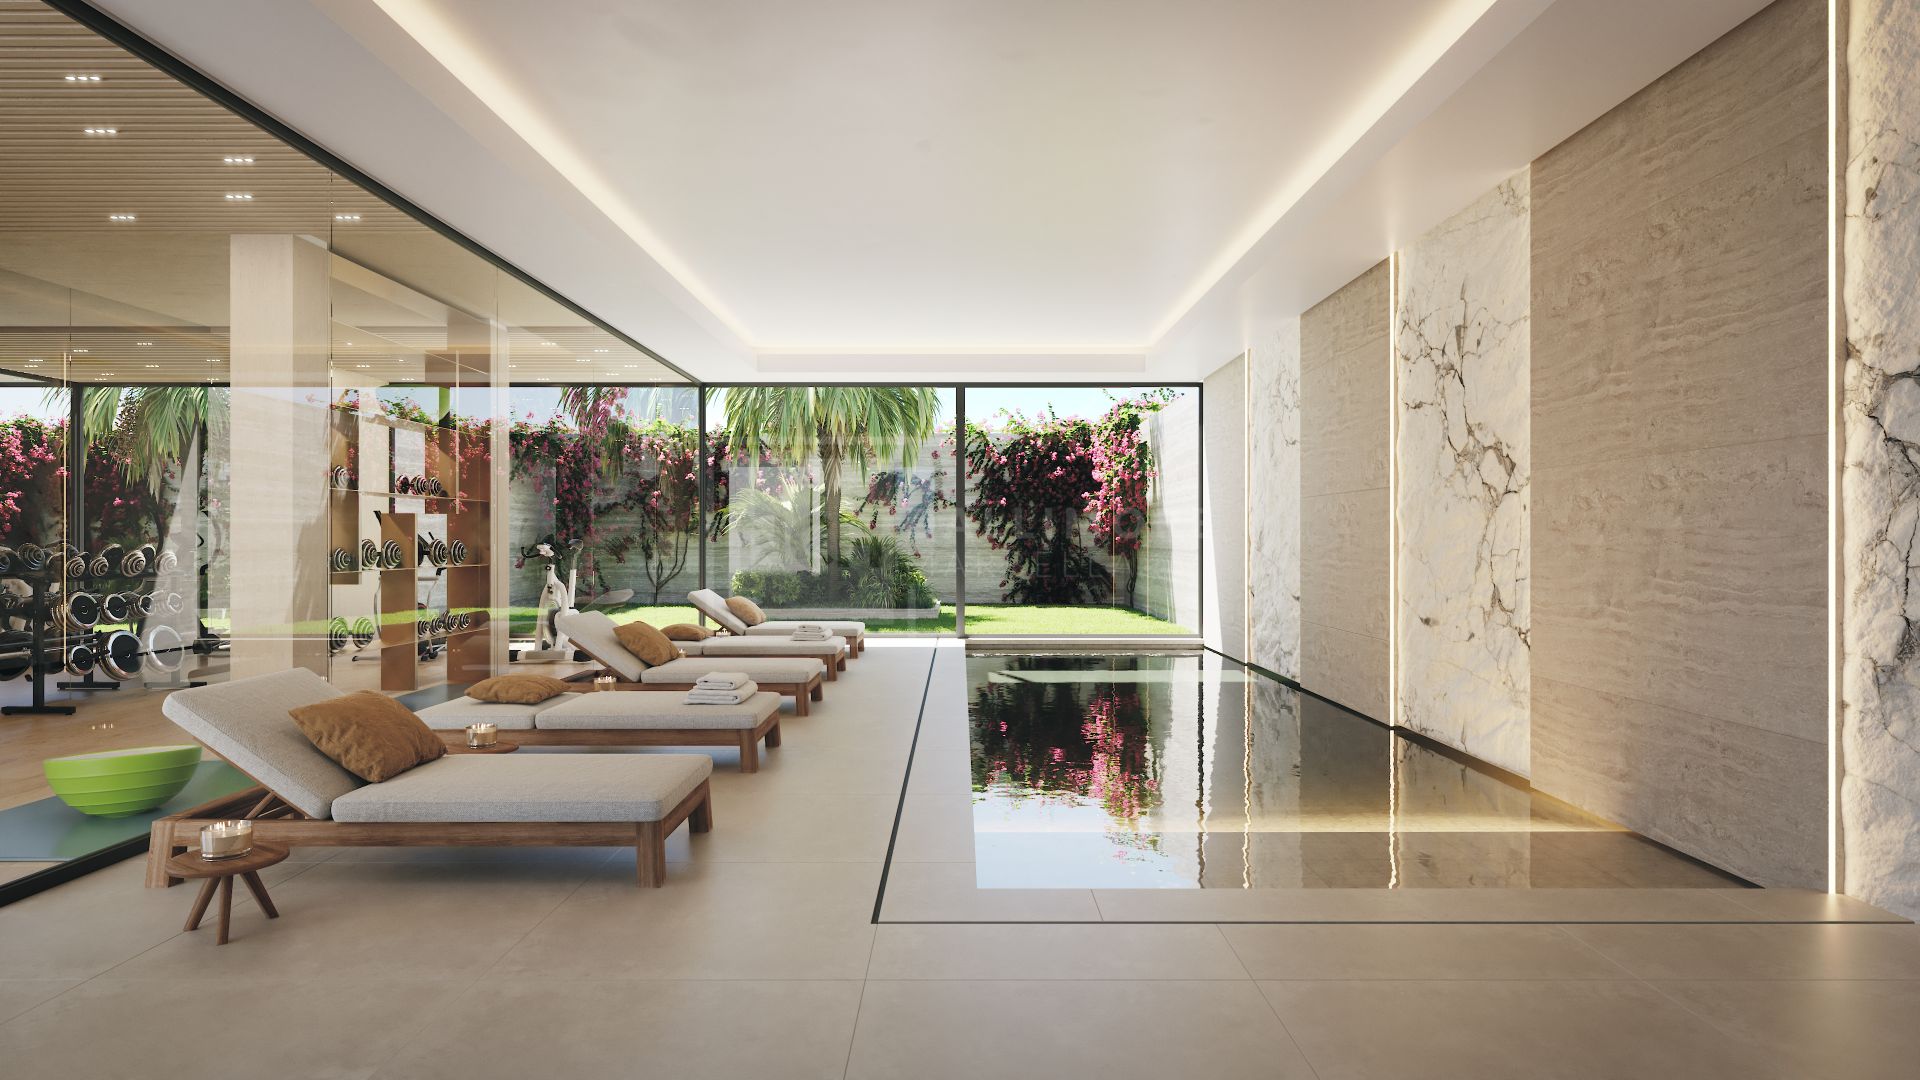 LUXURIOUS VILLA IN MARBELLA - A STATE-OF-THE-ART PROPERTY WITH BREATHTAKING VIEWS